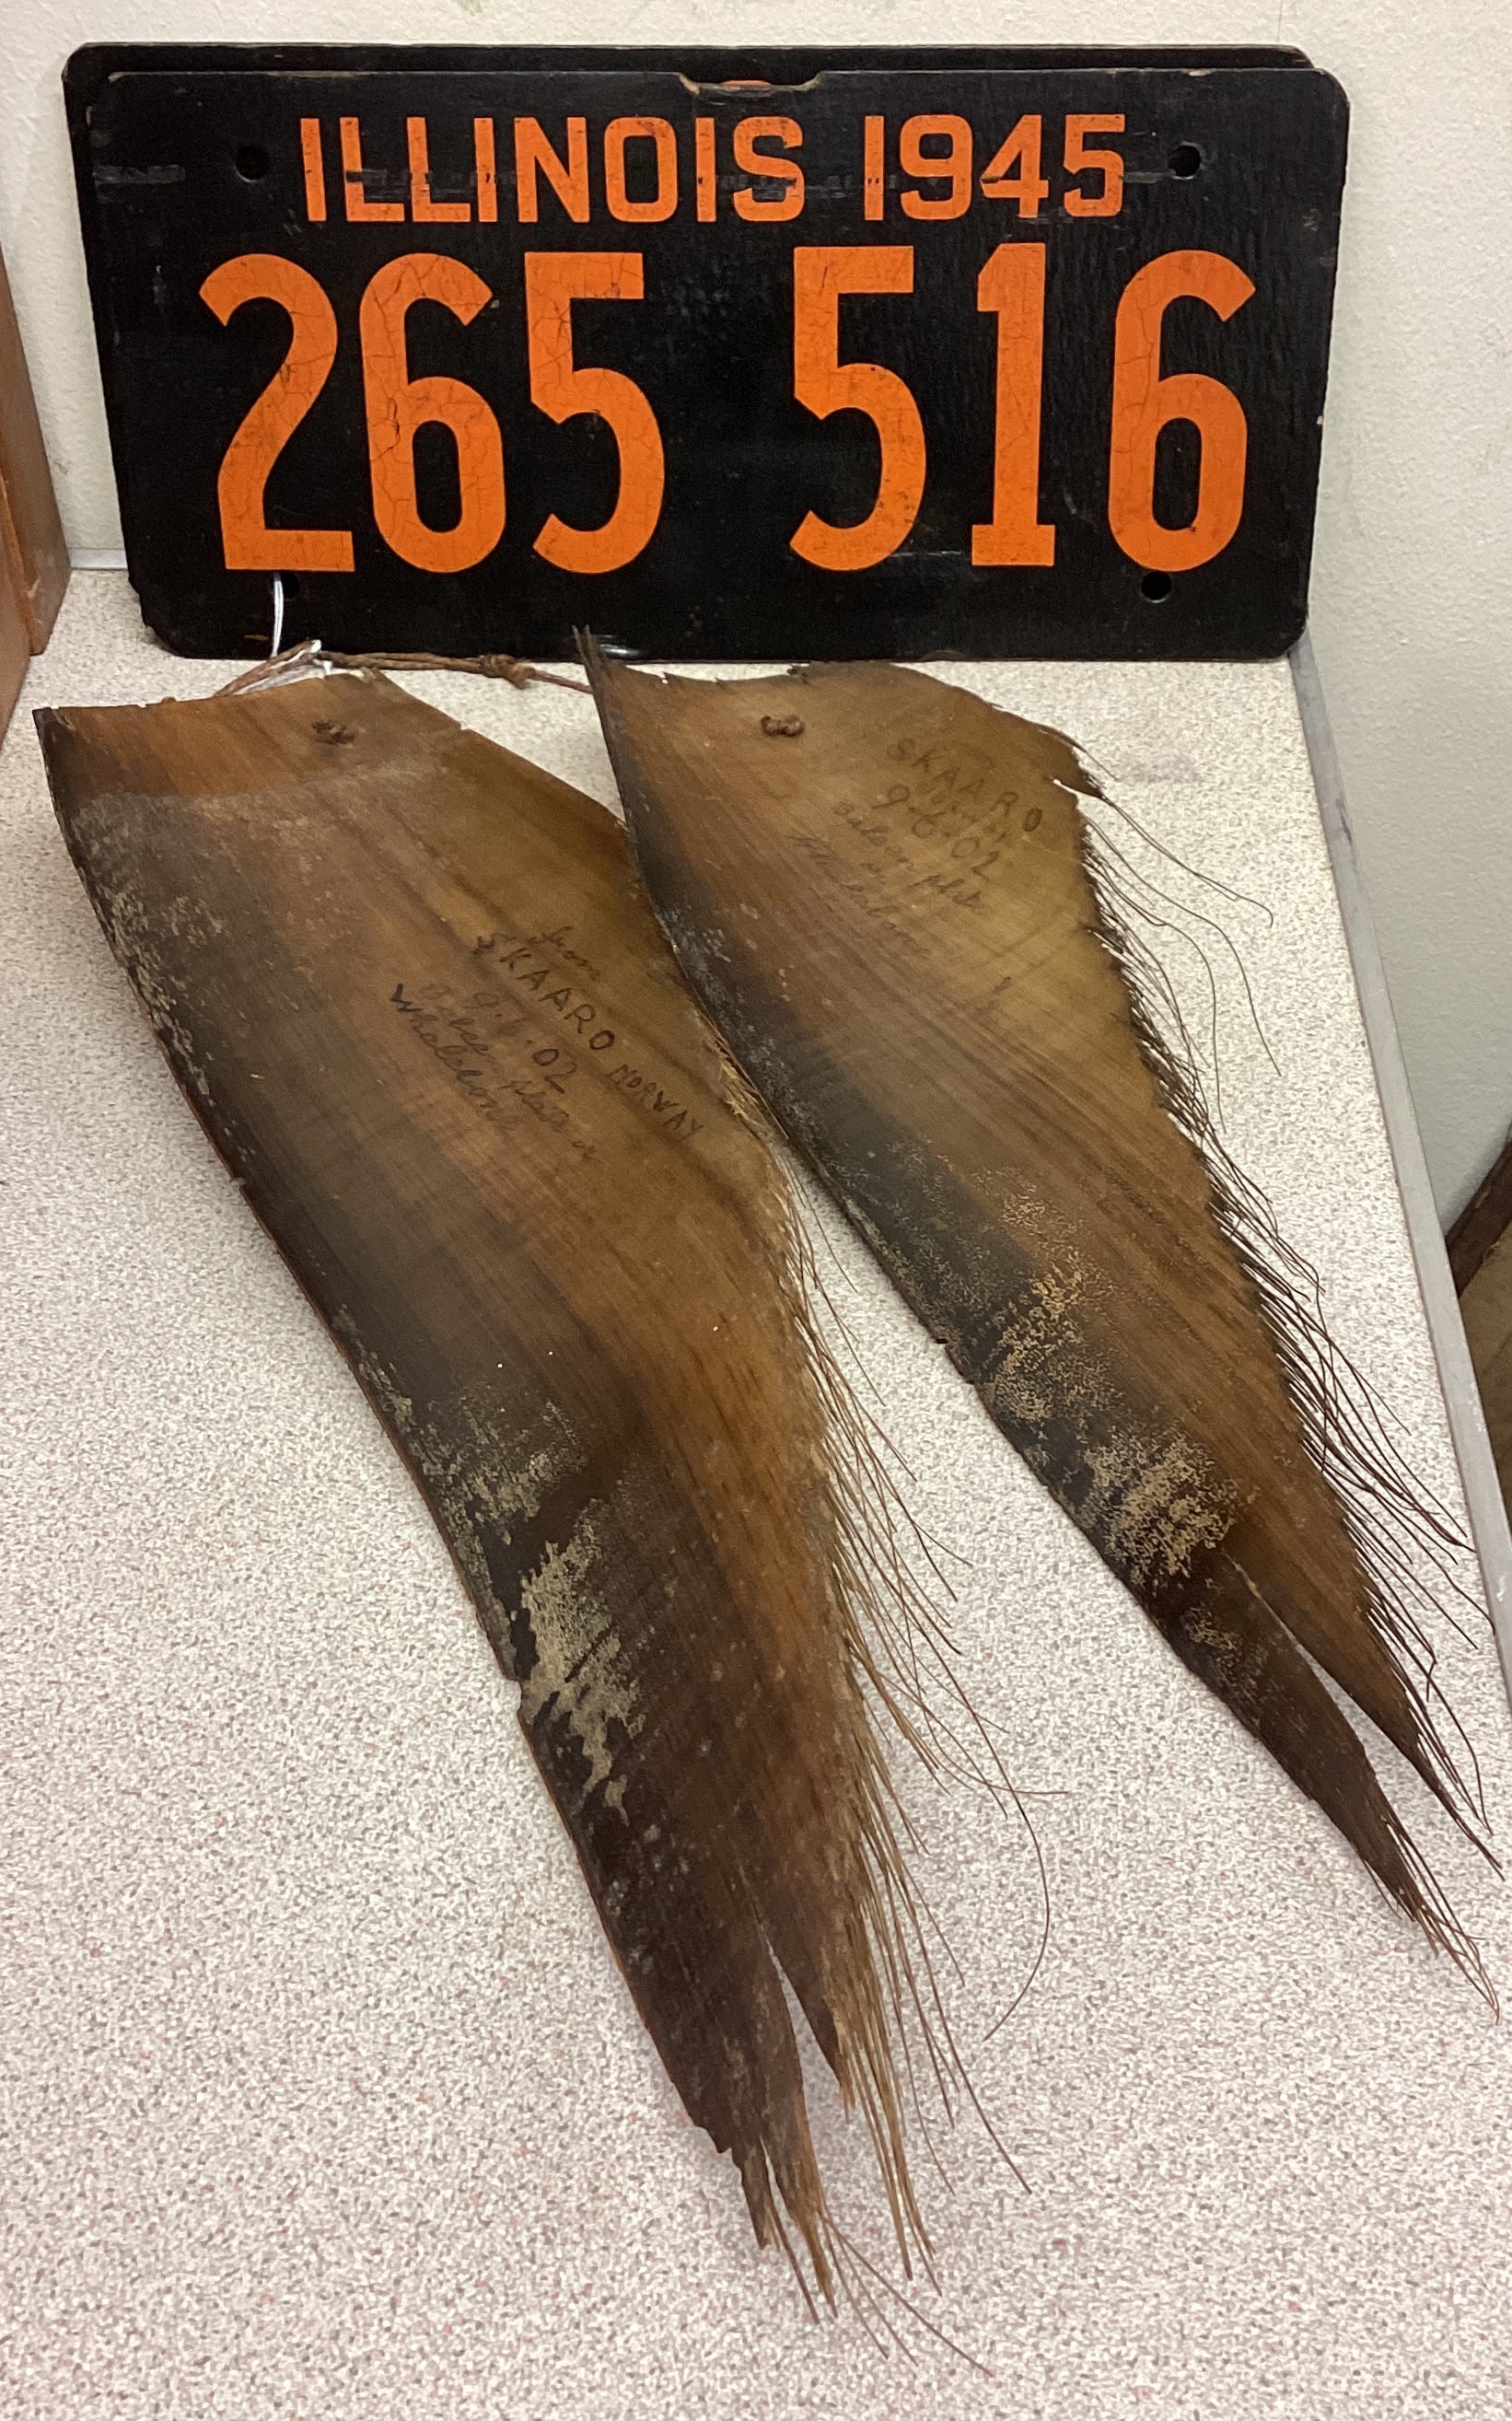 A pair of Illinois plates together with two whale skins.